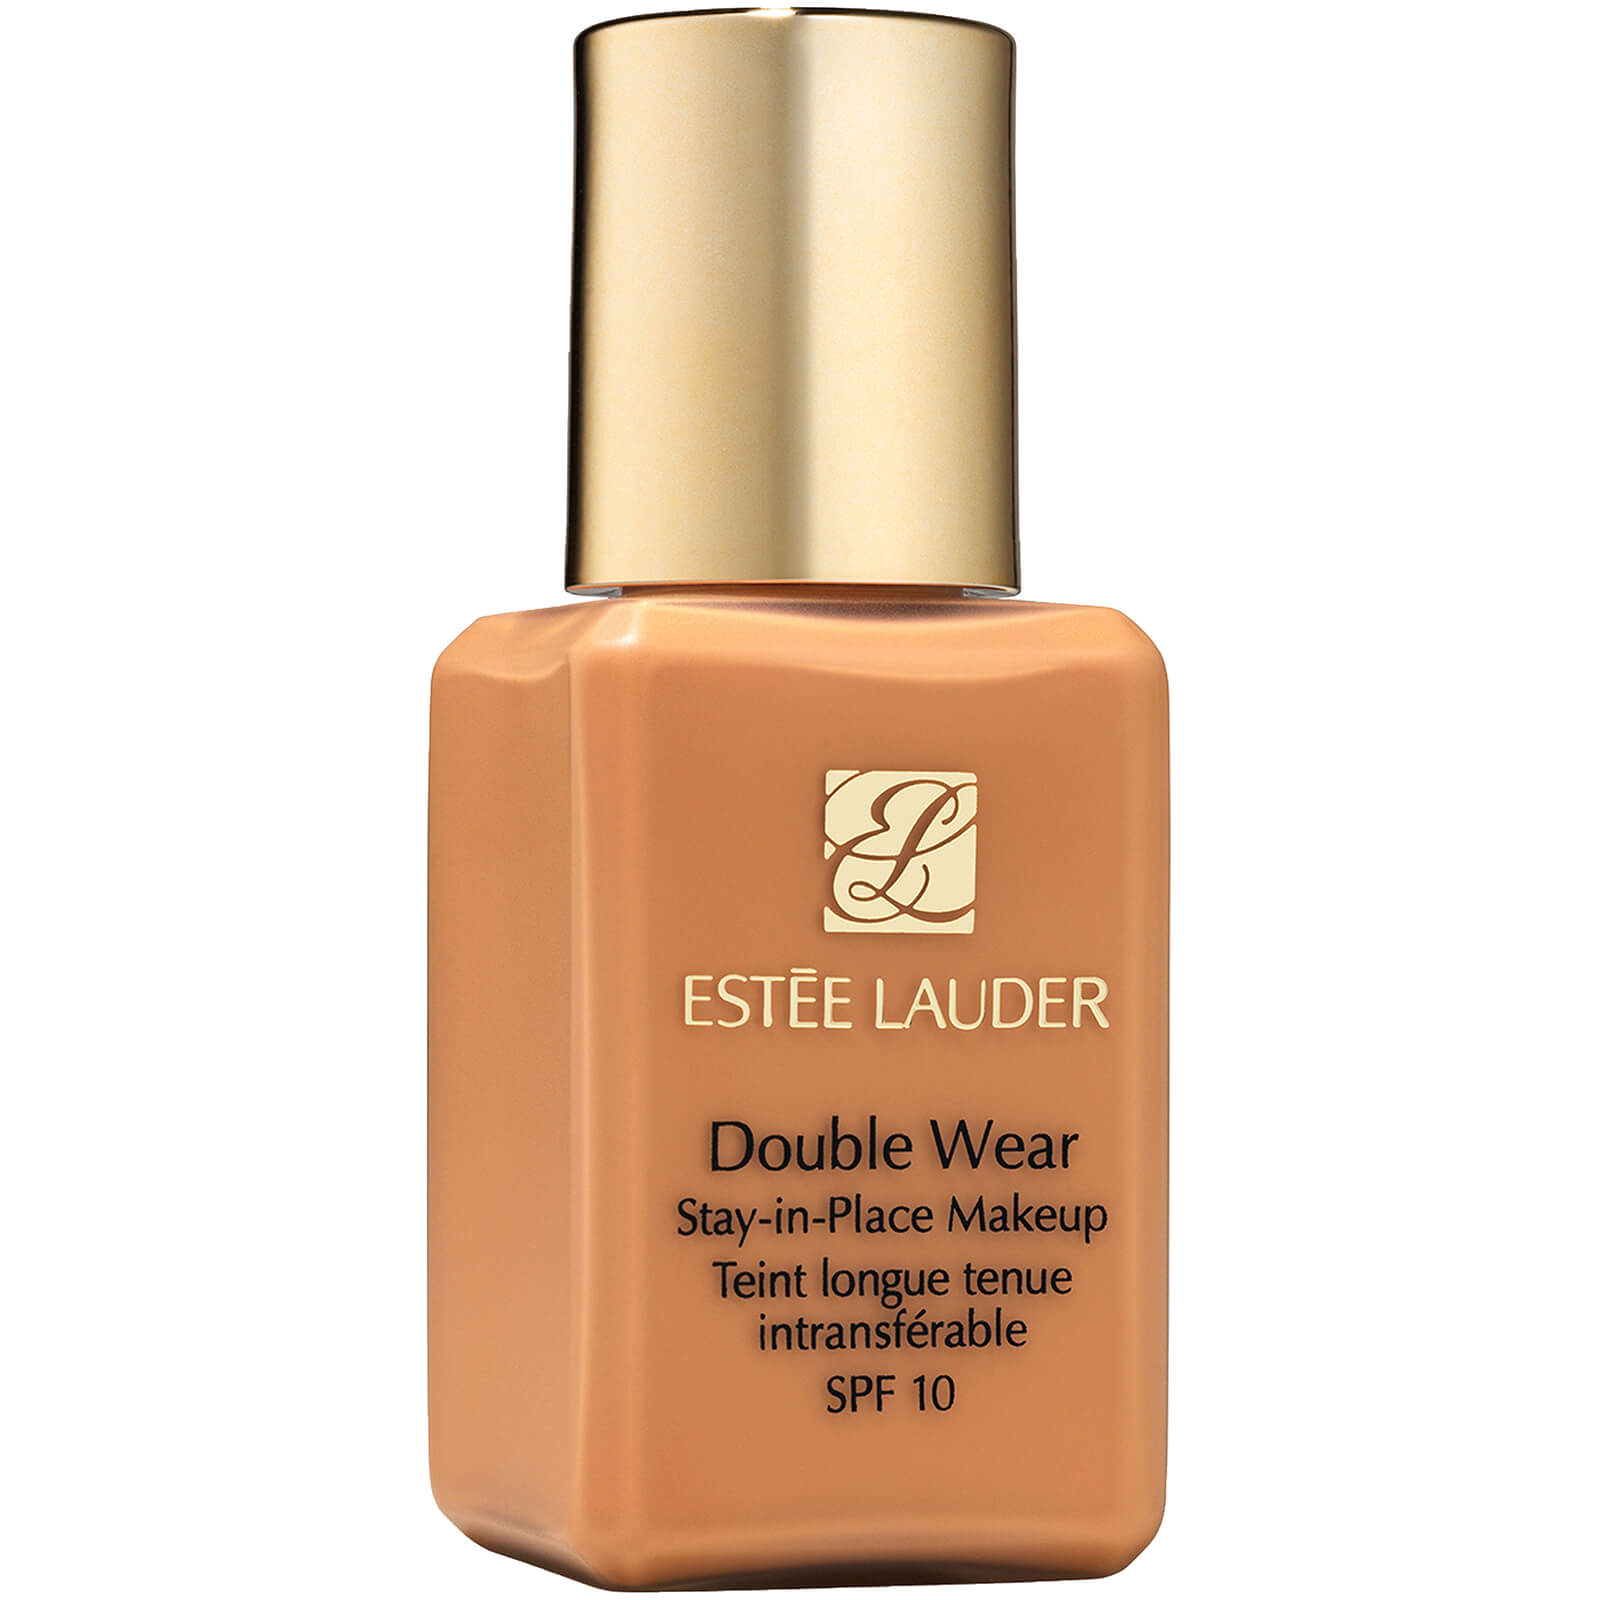 Estée Lauder Double Wear Stay-in-Place Makeup 15ml (Various Shades) - 4W3 Henna